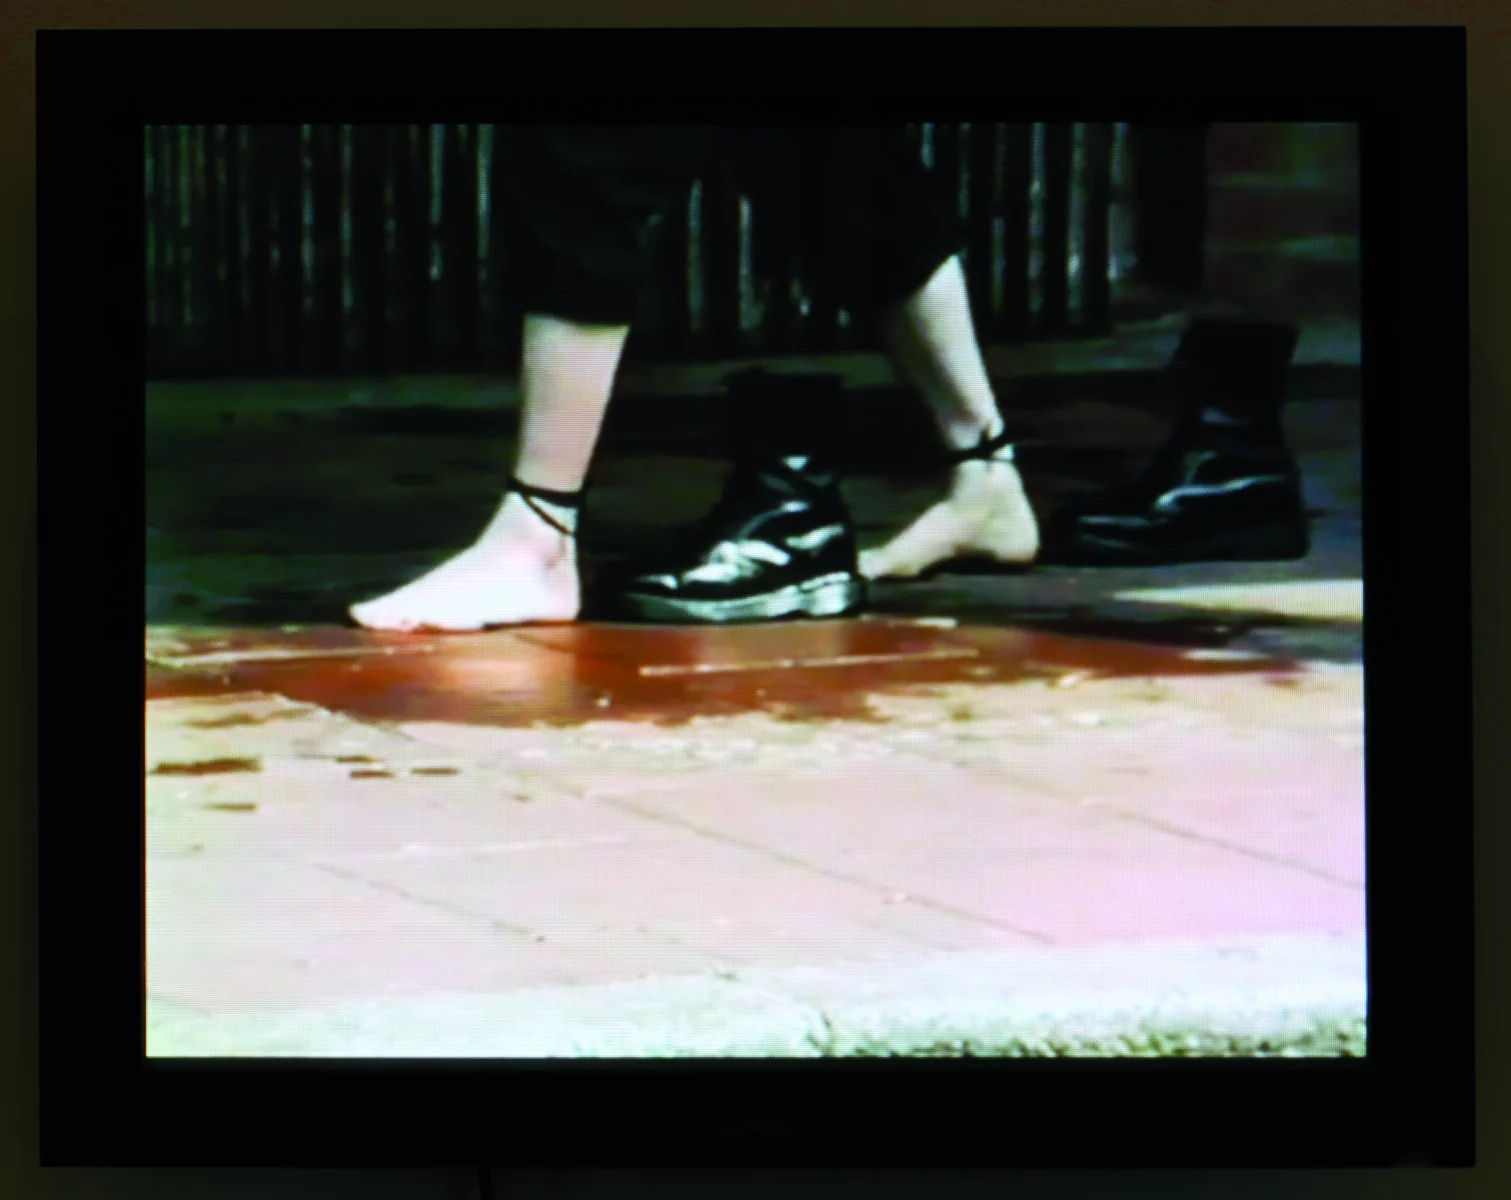 Still shot of woman's bare feet and a pair of black boots.